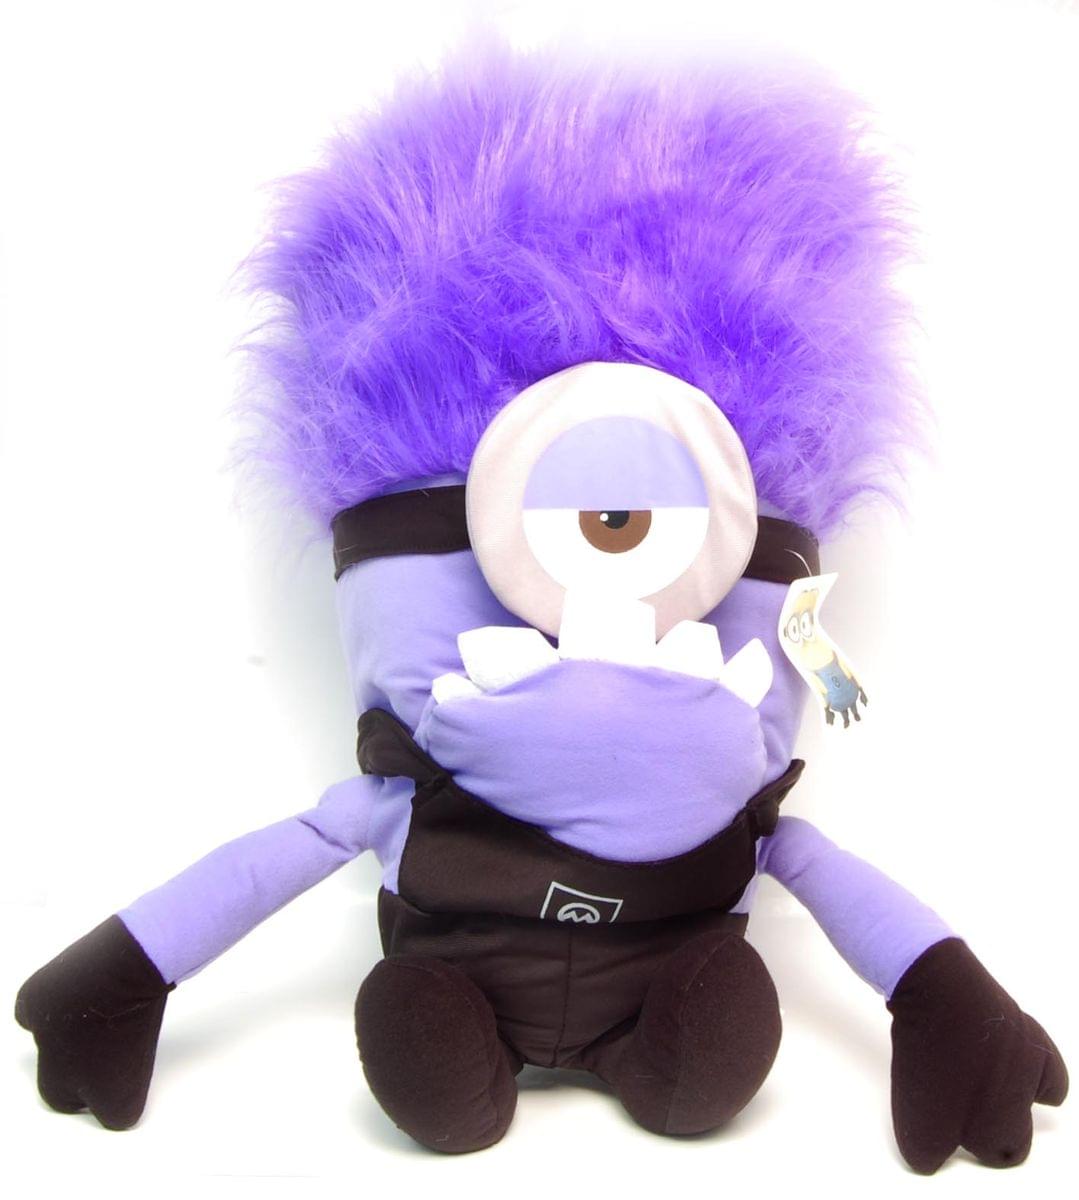 Despicable Me Minions Plush Backpack Purple Two Eyes 